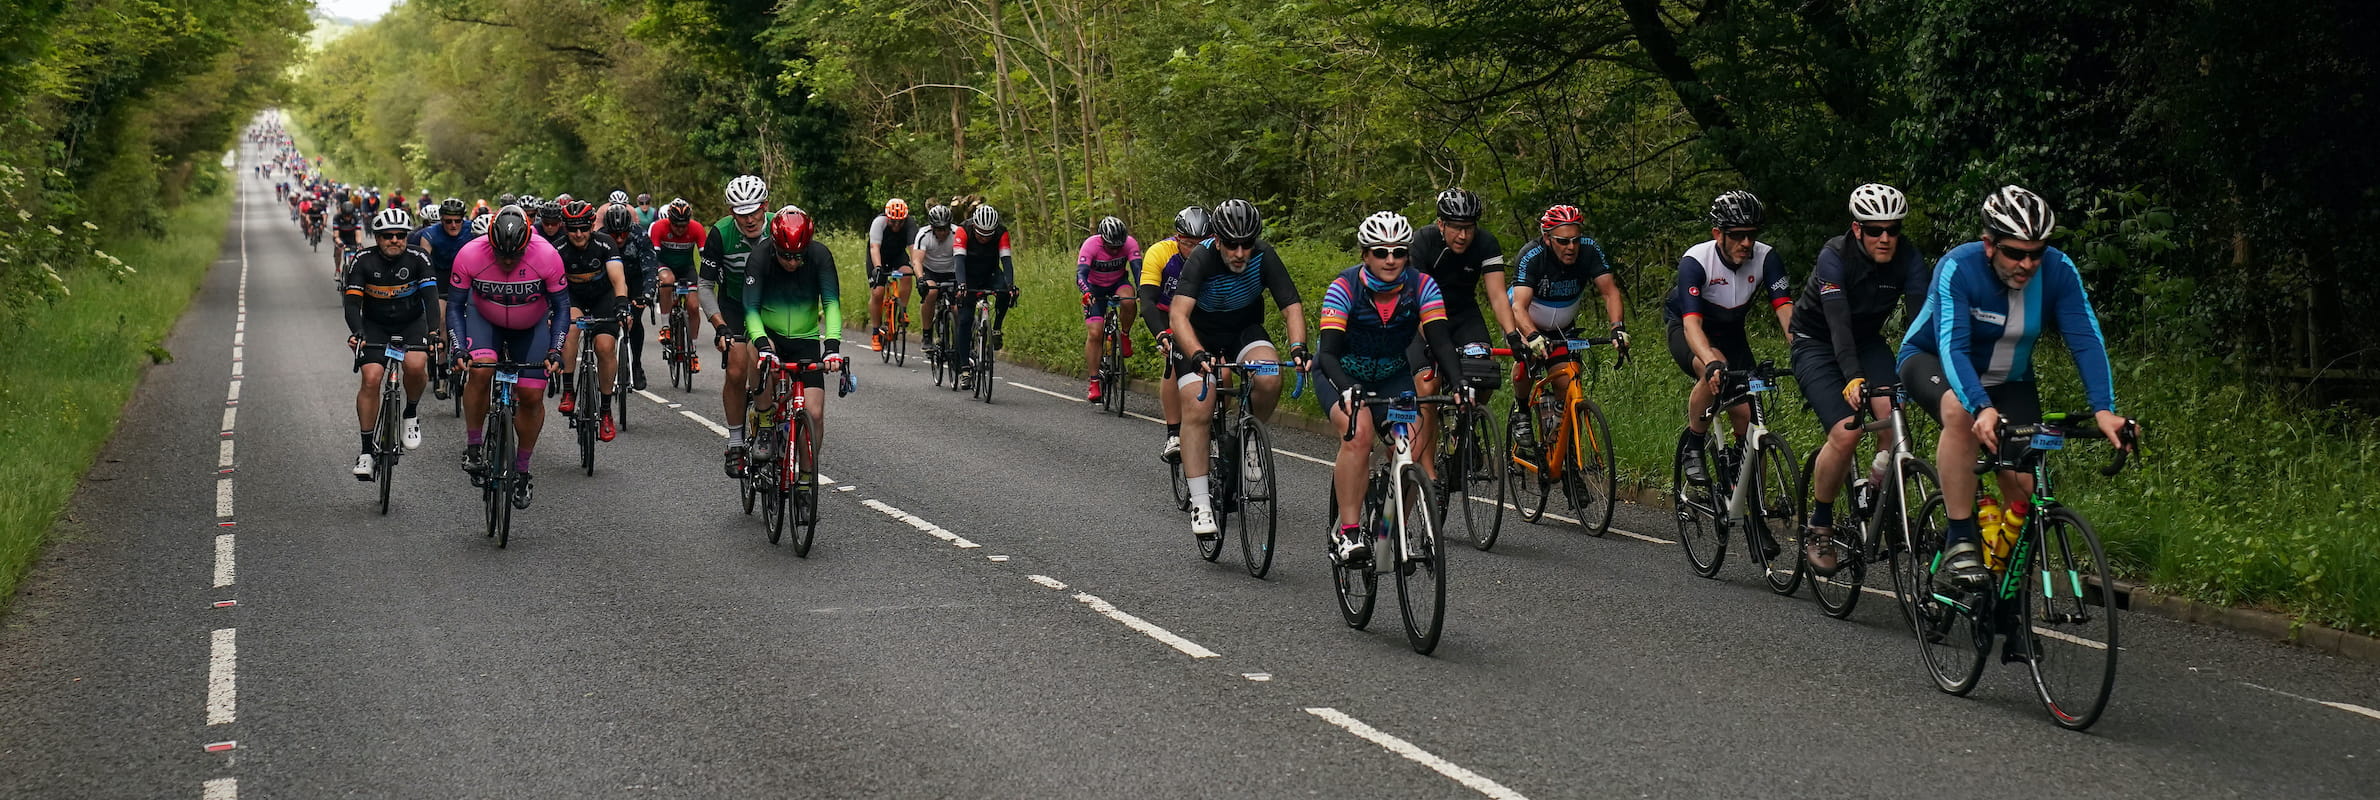 Riders cycling through the countryside during the RideLondon-Essex sportive